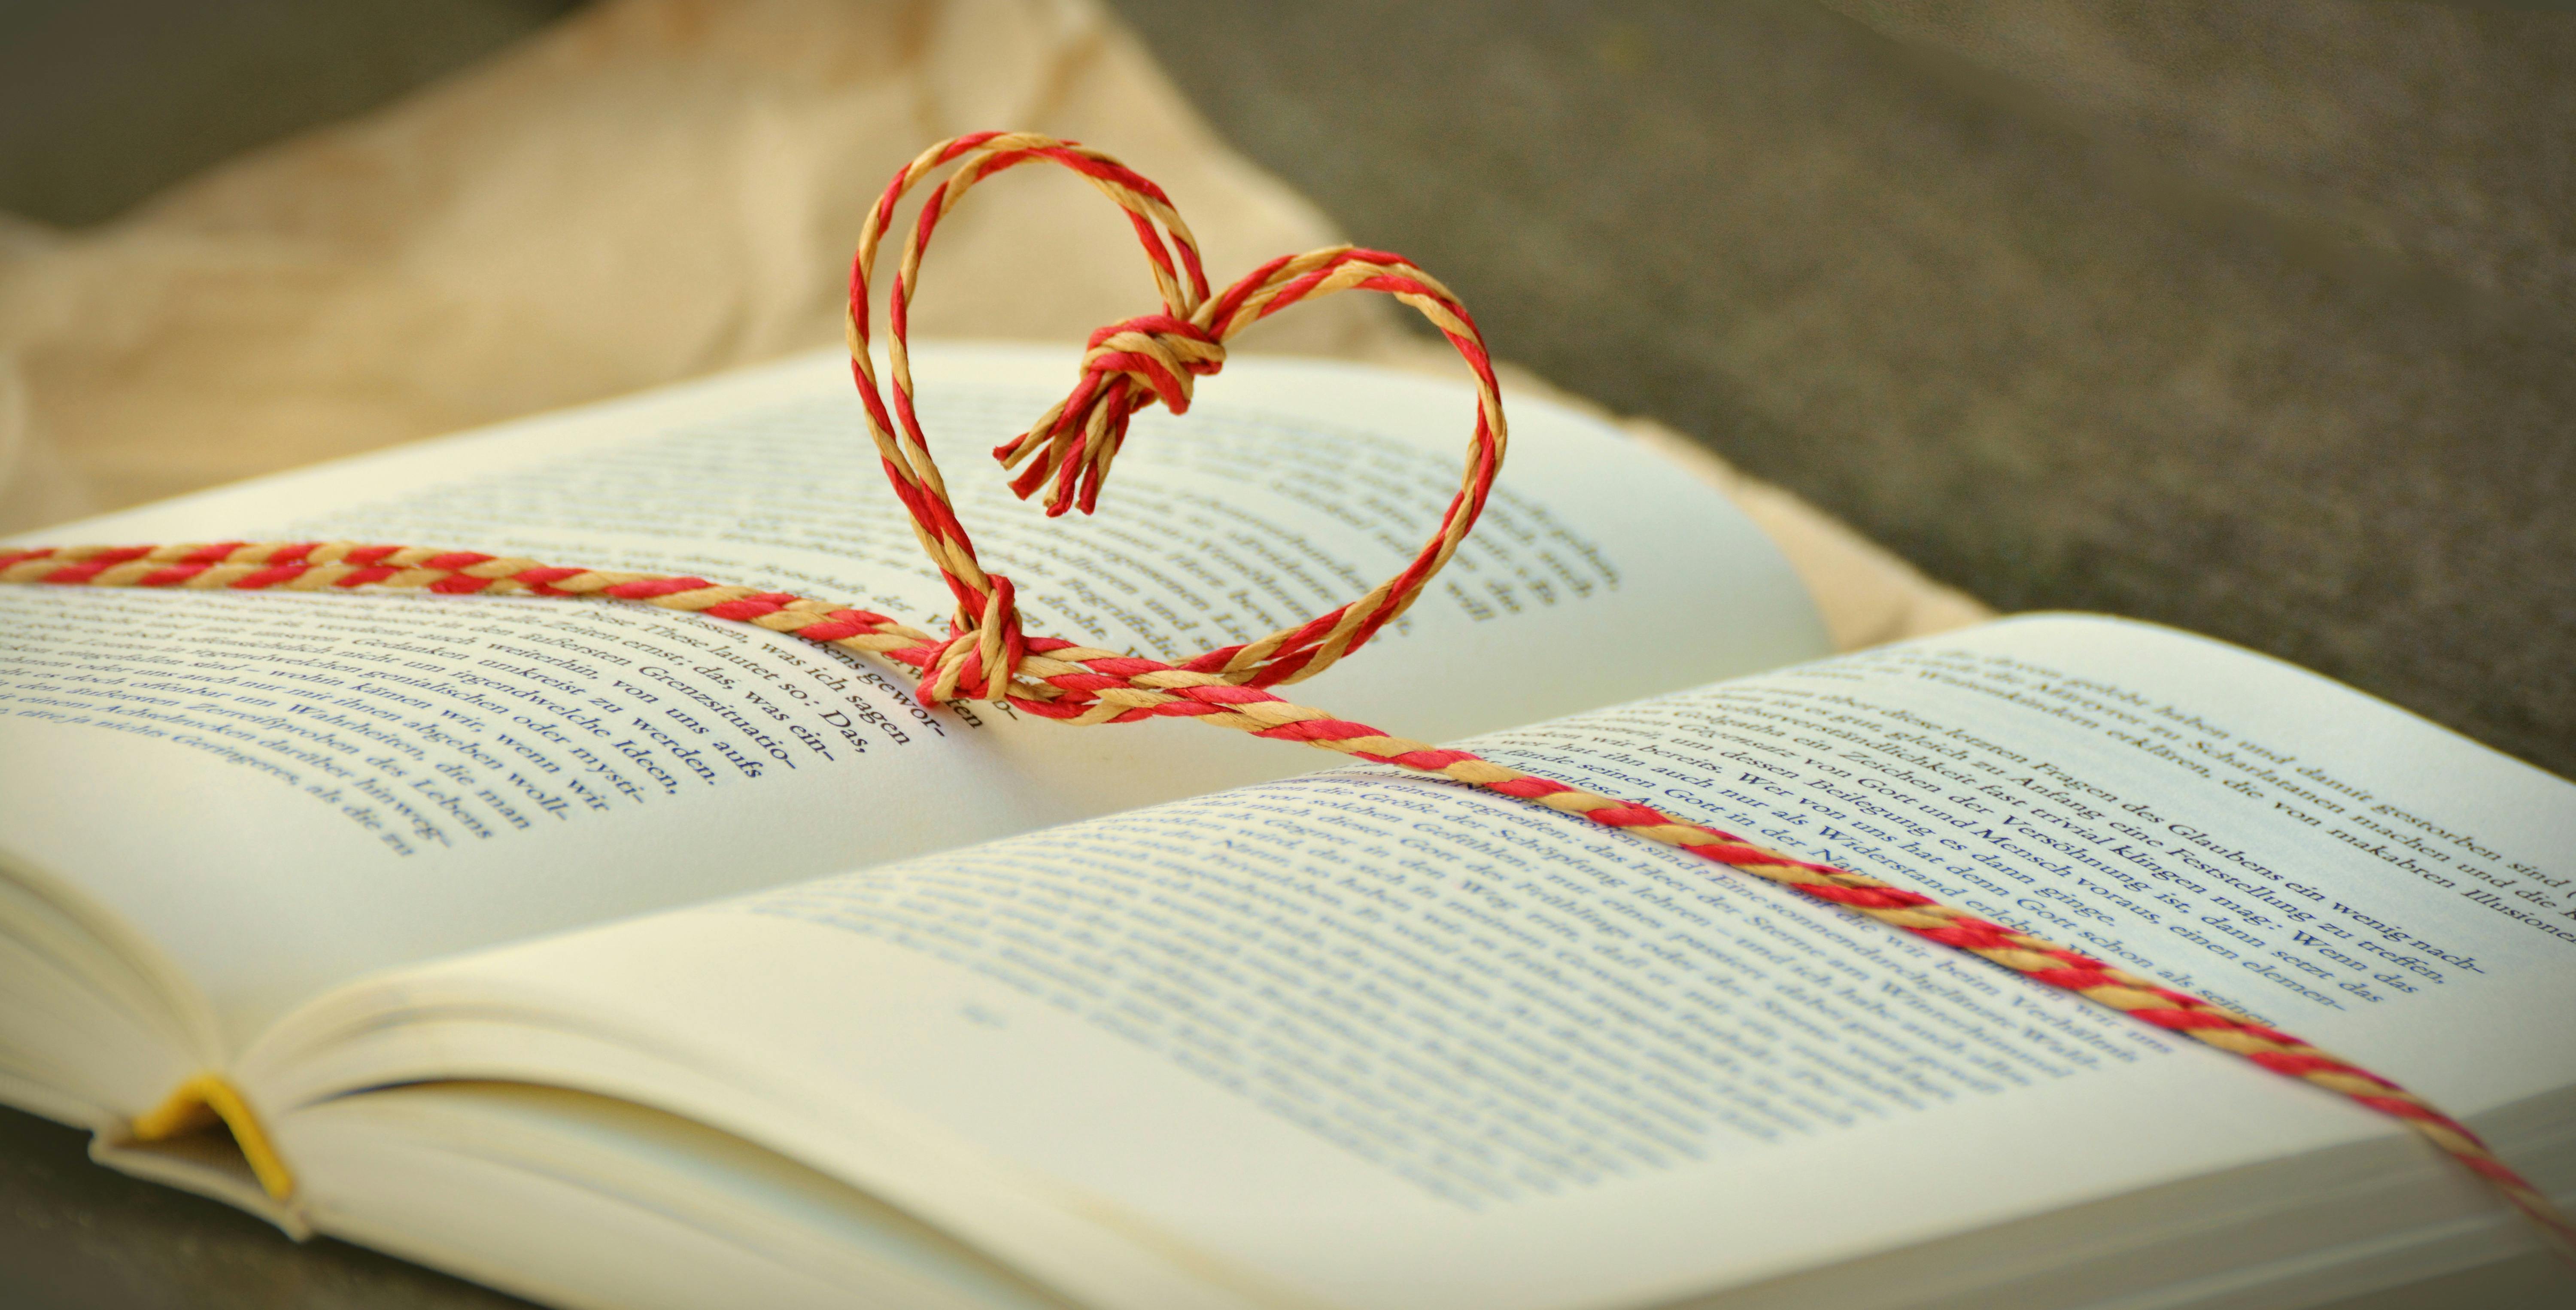 Tied Red and Beige Heart Knot on Opened Book Selective Focus Photo